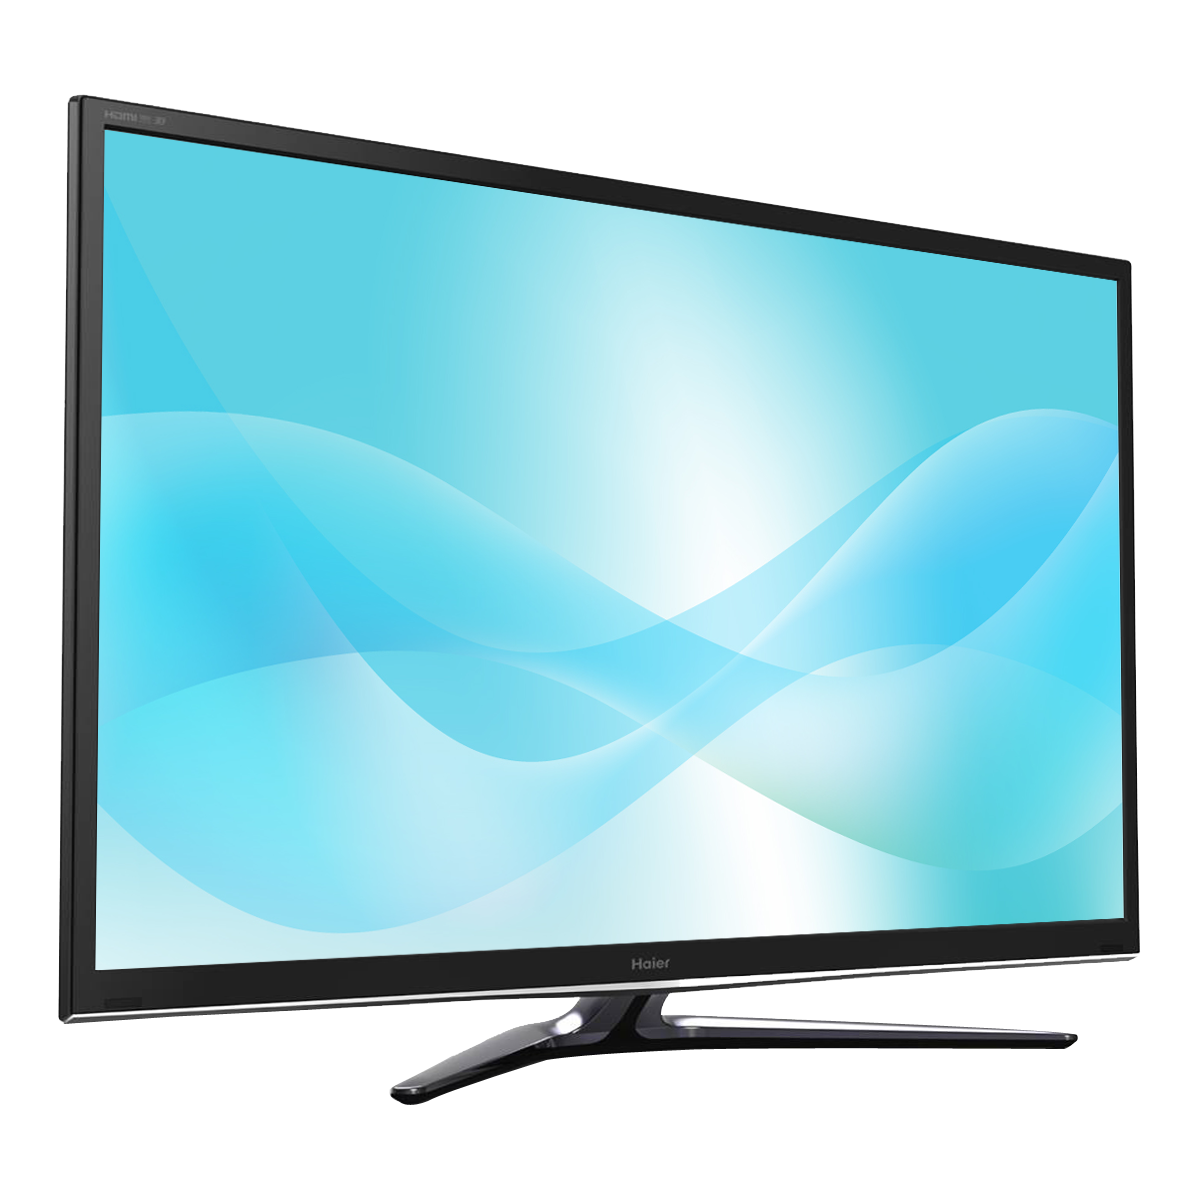 Icon Lcd Tv, Icon Lcd Tv Suppliers and Manufacturers at Alibaba.com